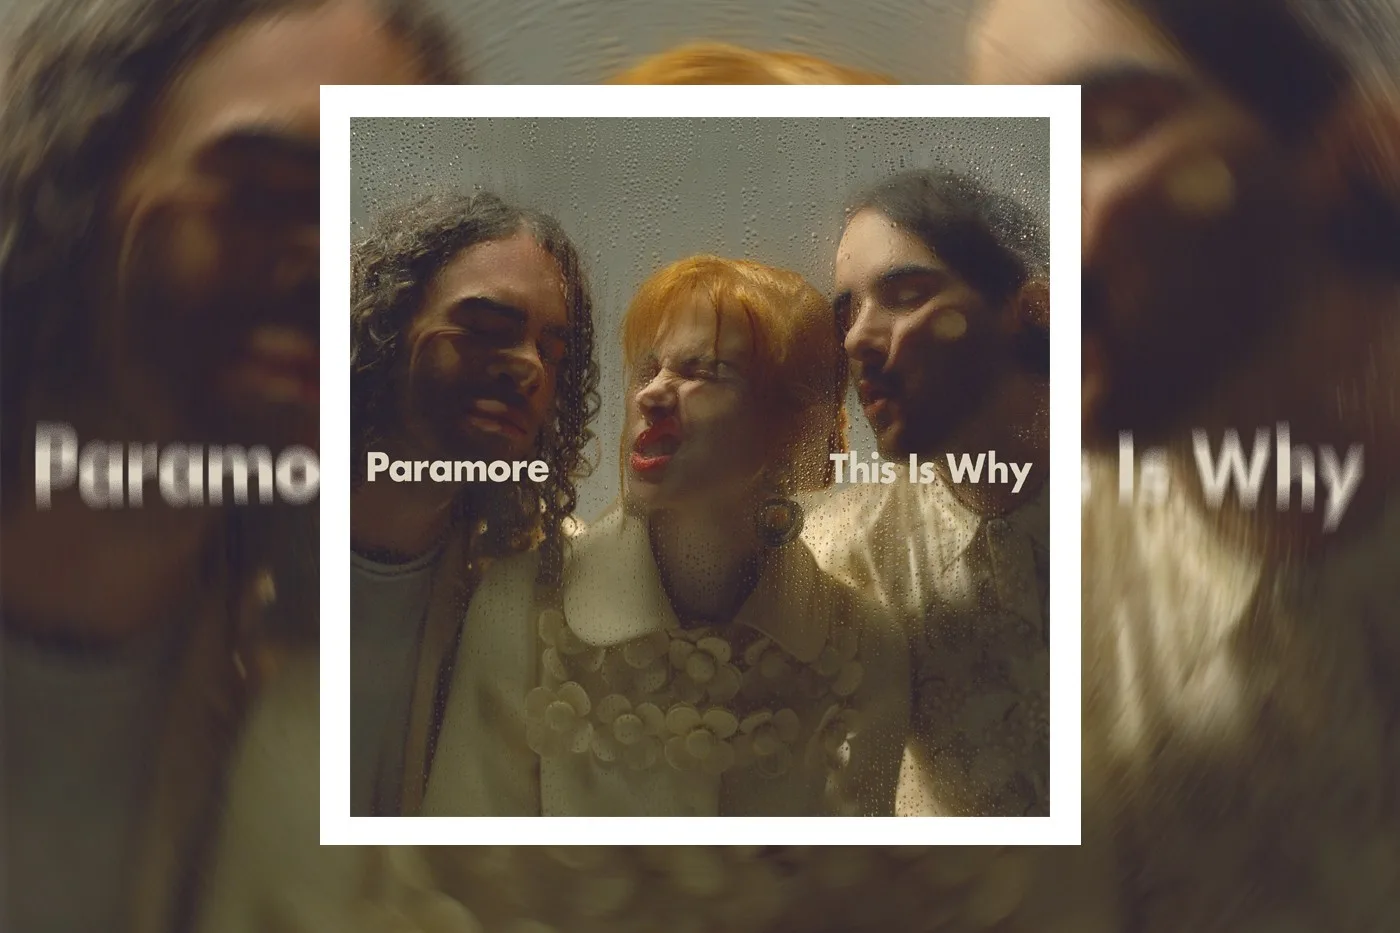 Paramore Releases New Album, “This Is Why”